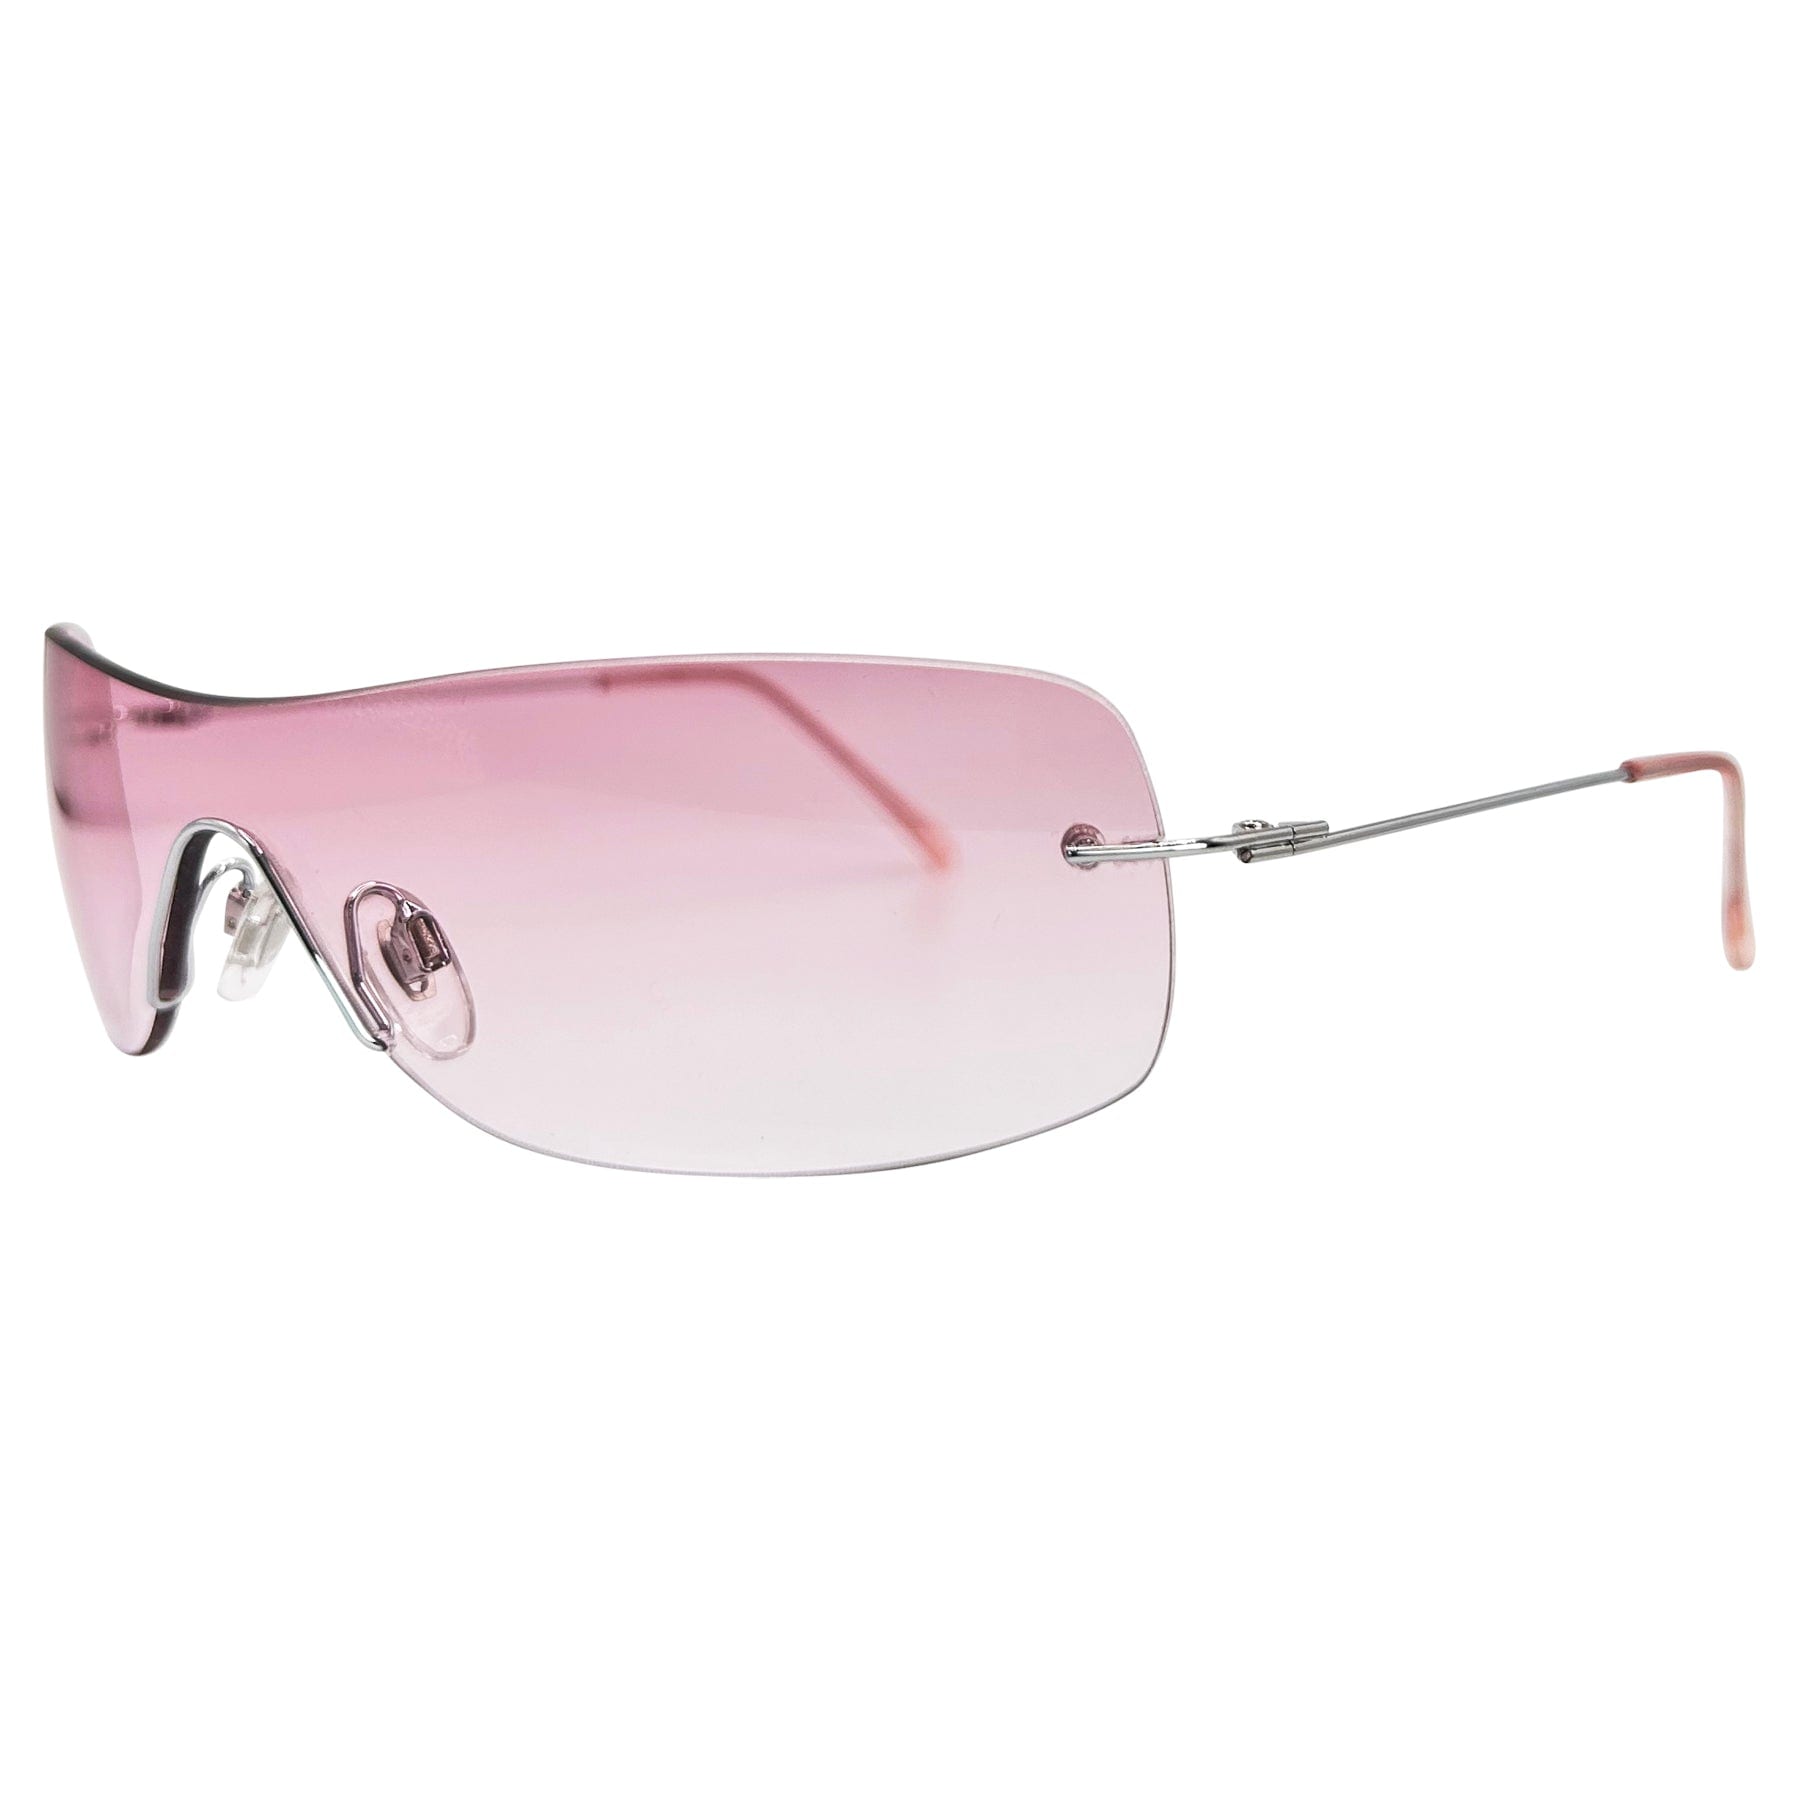 y2k vintage look with a rimless shield and colorful lens